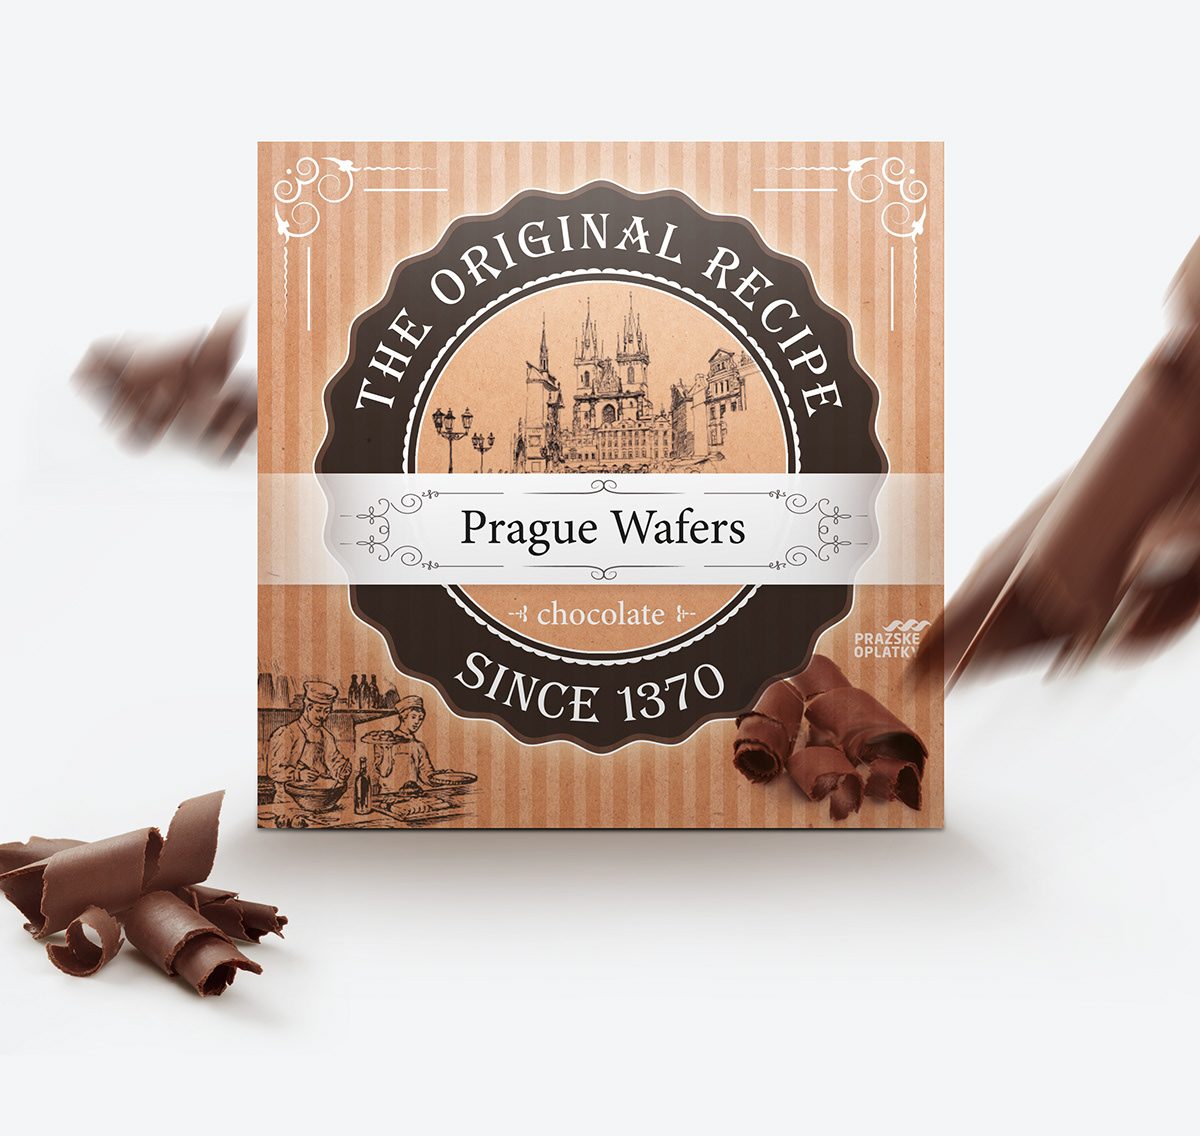 prague Wafers hazelnut chocolate Czech sweet product traditional cookies biscuit shortbread foodstuff Food  box